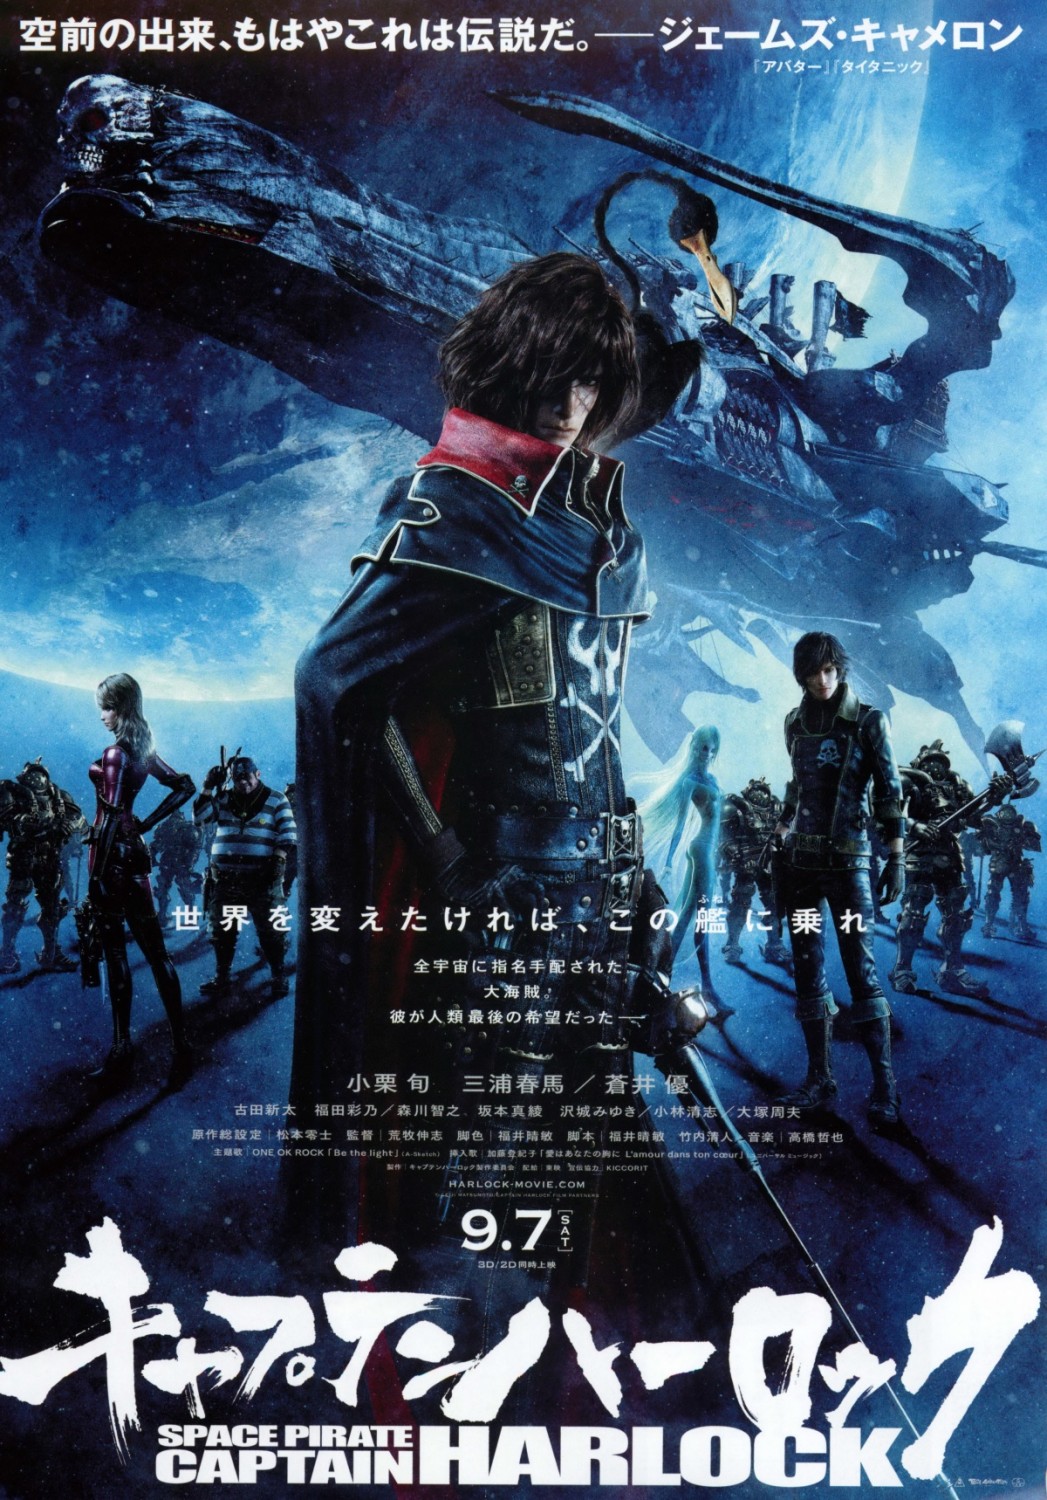 Extra Large Movie Poster Image for Space Pirate Captain Harlock (#2 of 3)